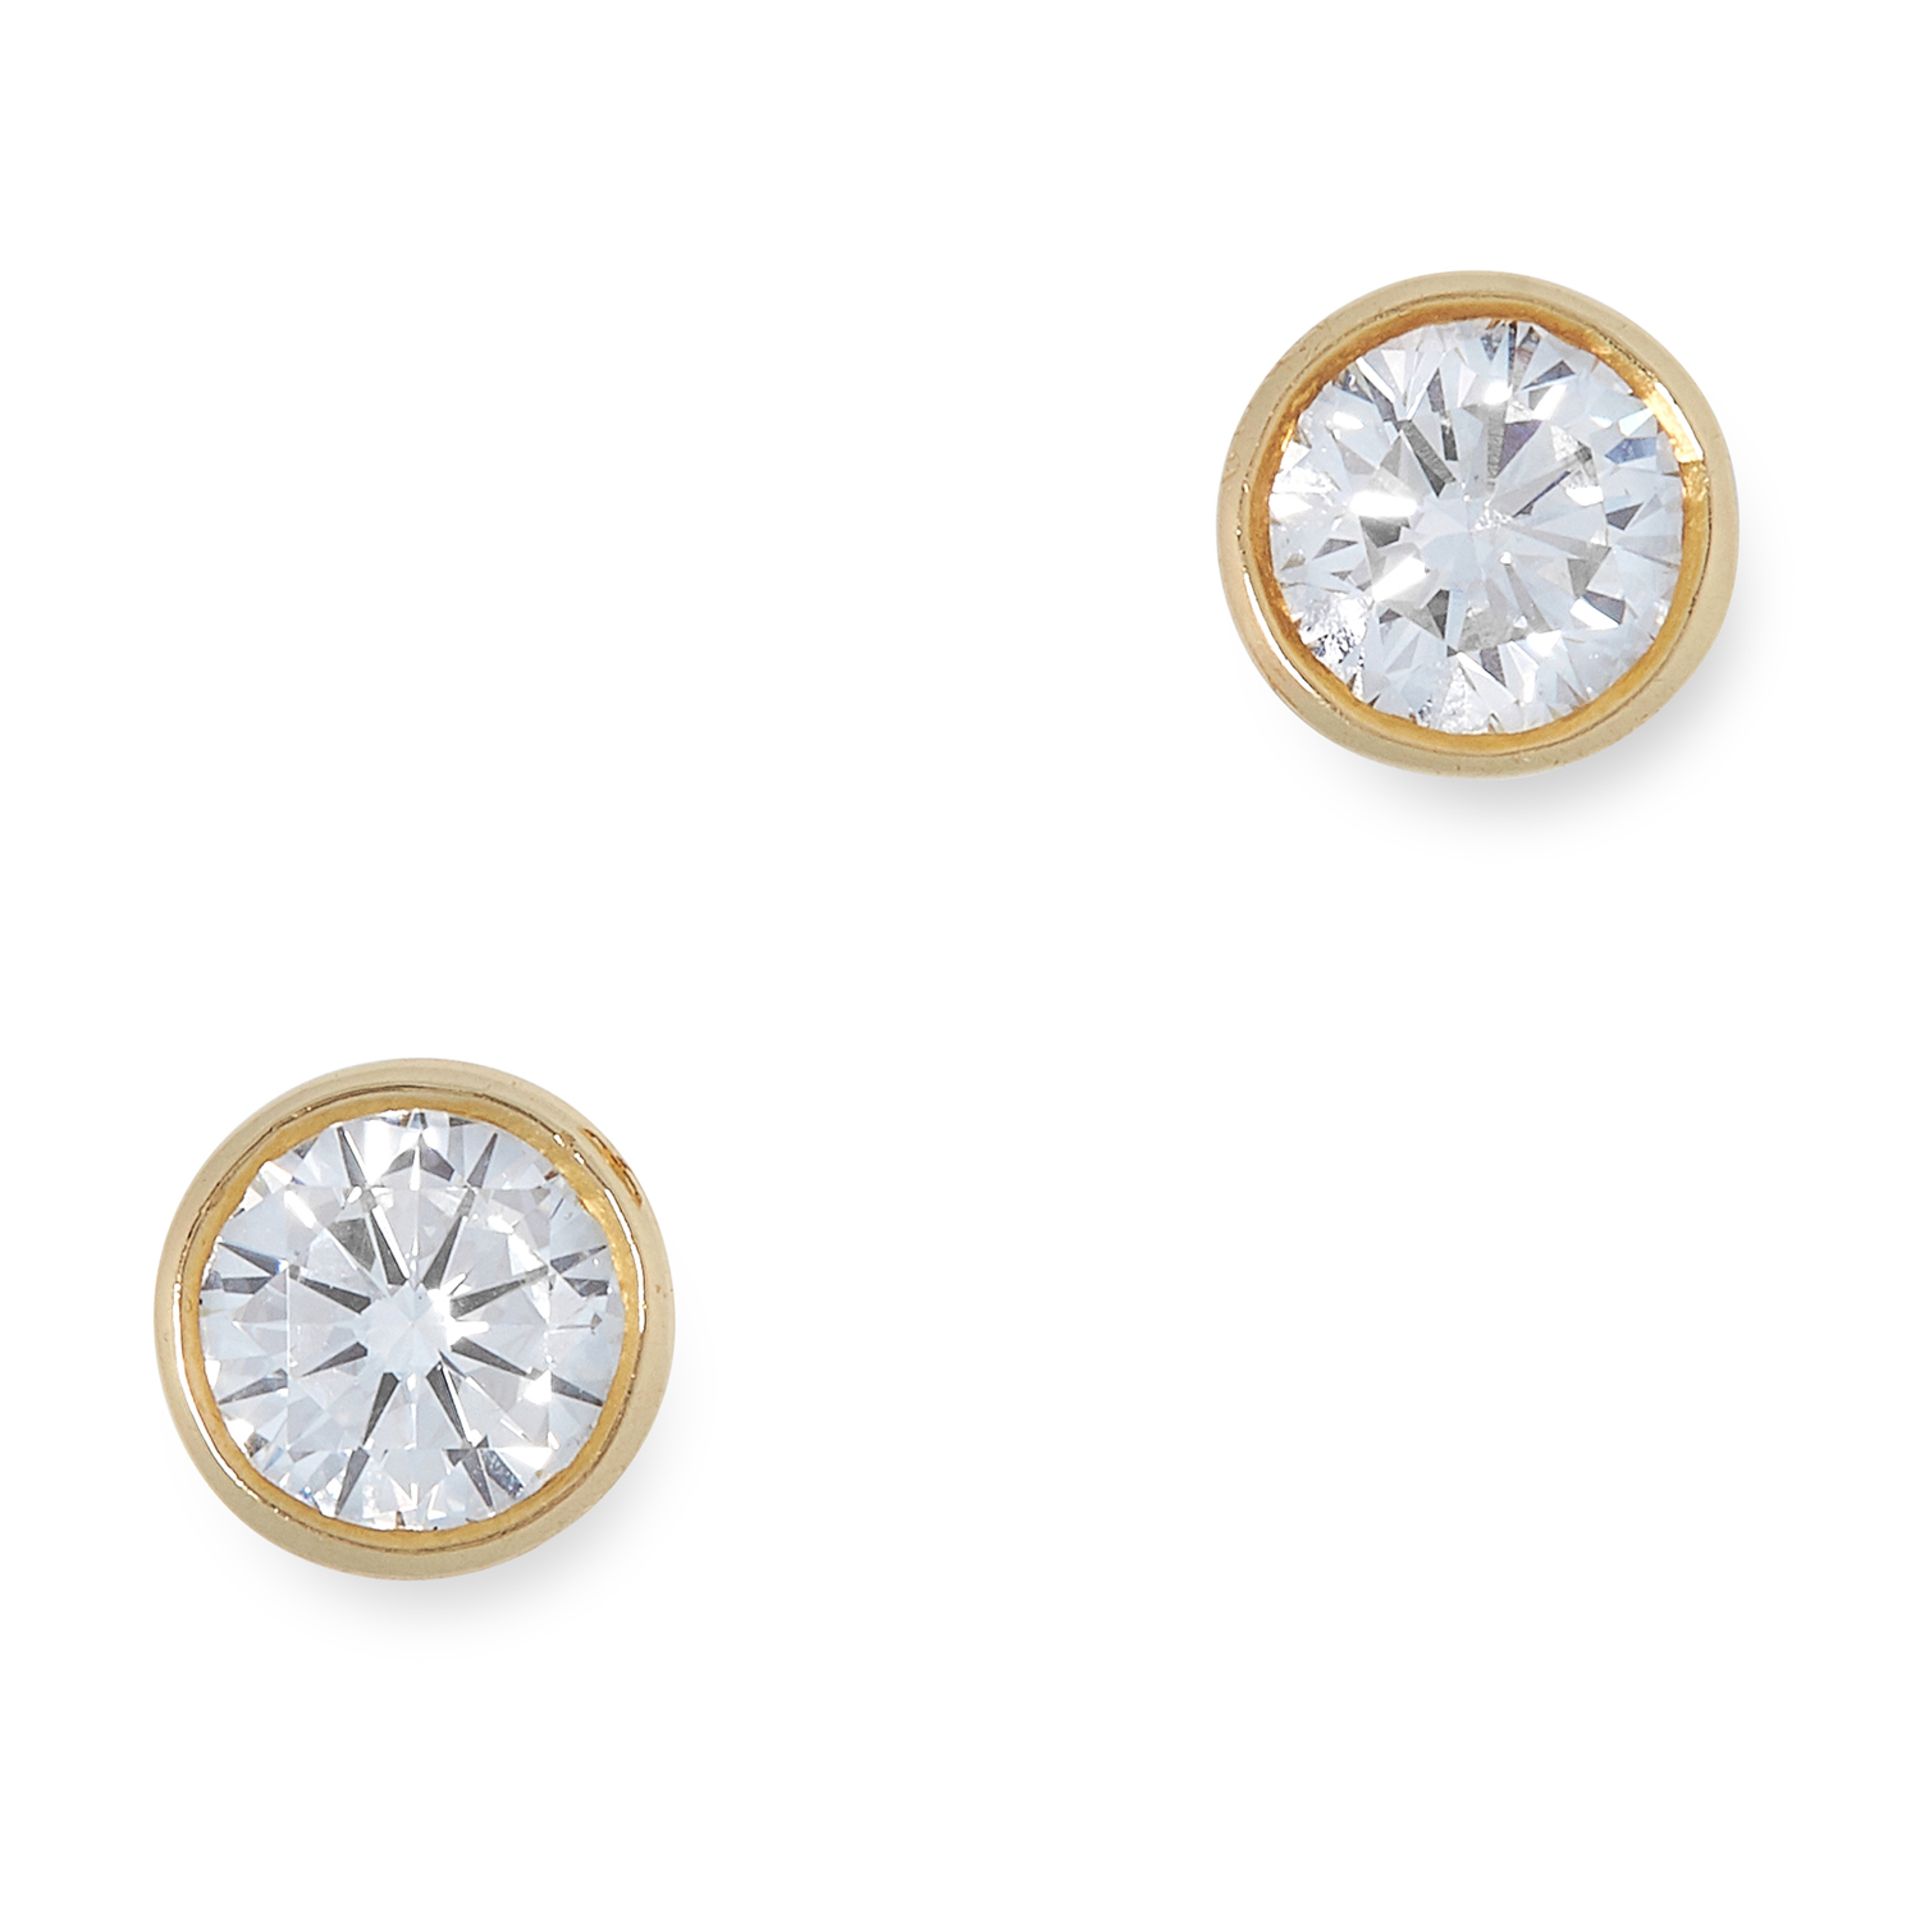 A PAIR OF DIAMOND STUD EARRINGS, BOODLES each set with a round cut diamond, totalling 0.90 carats,